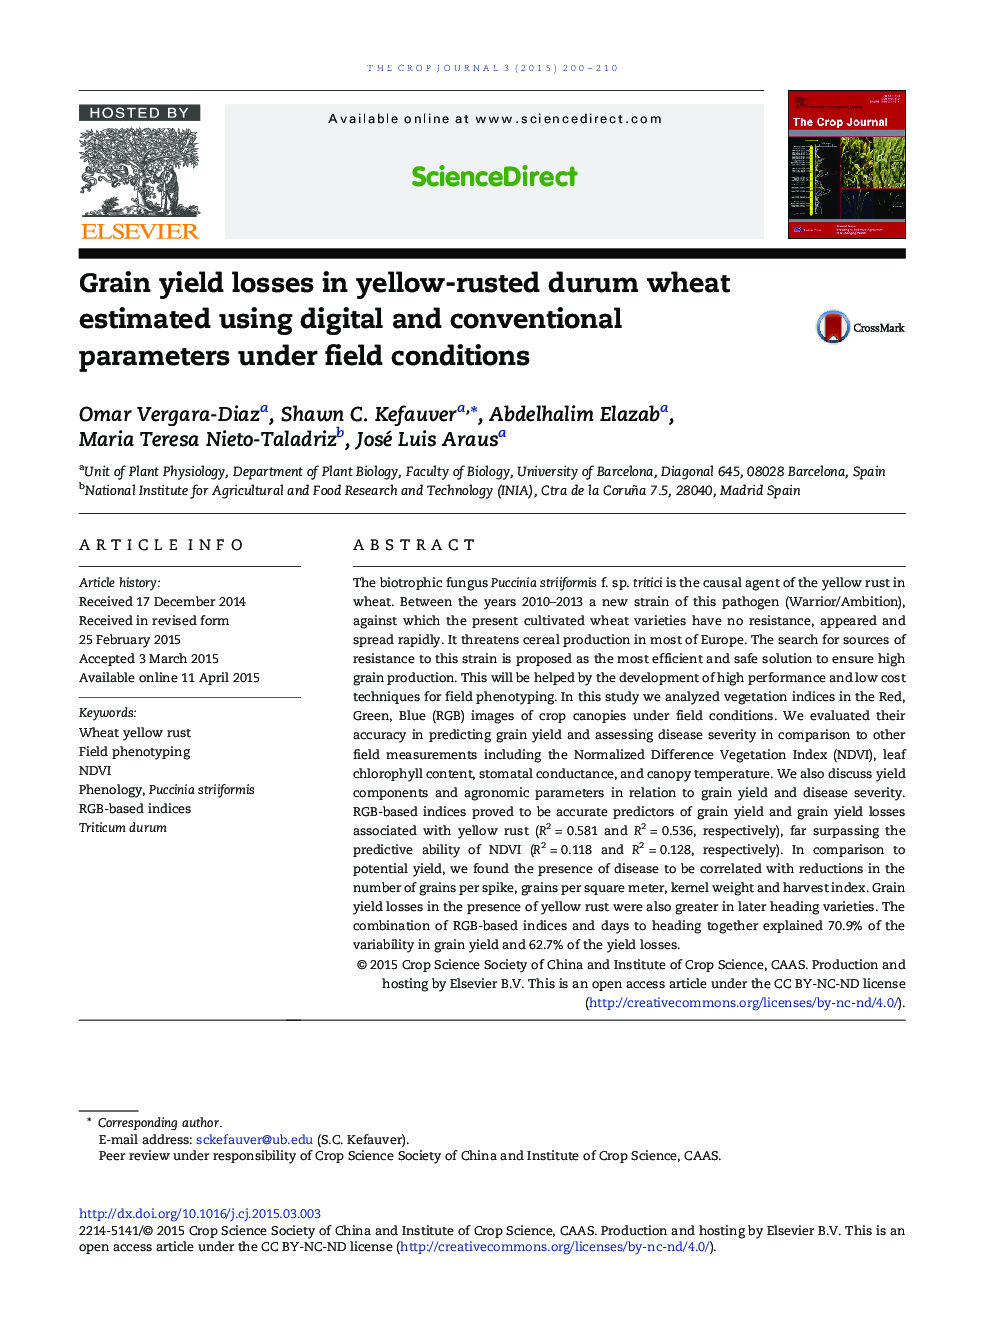 Grain yield losses in yellow-rusted durum wheat estimated using digital and conventional parameters under field conditions 